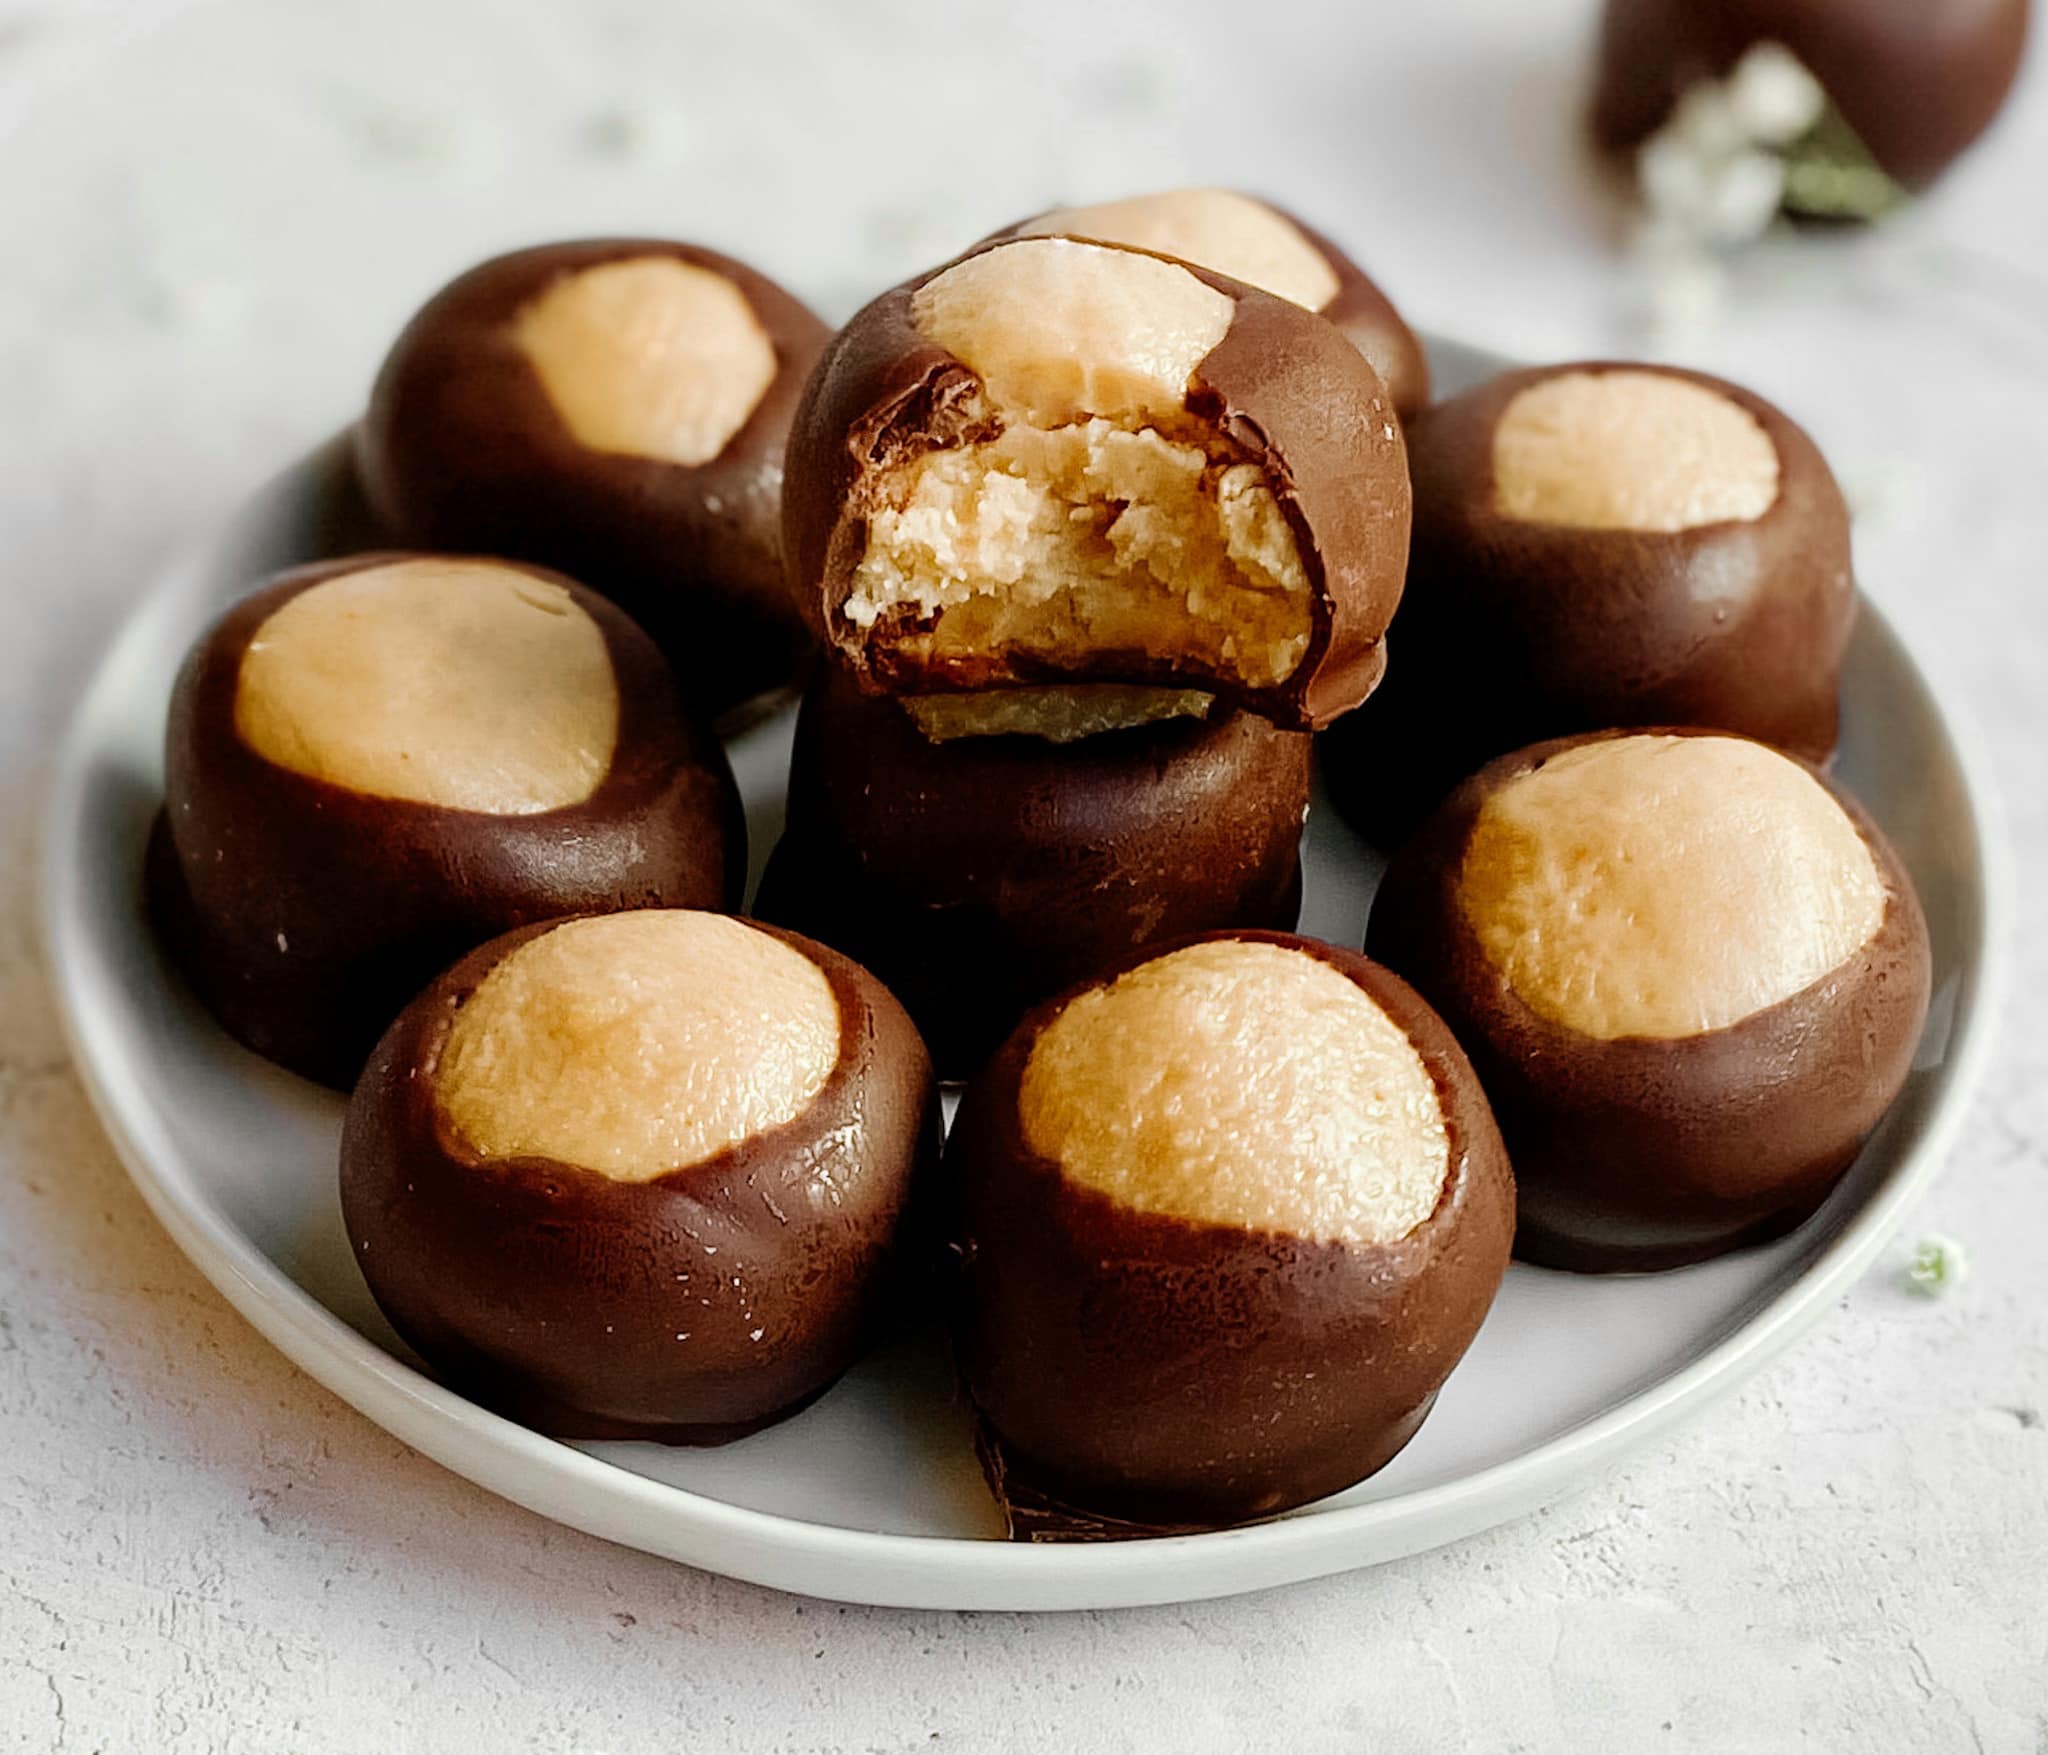 A stack of buckeyes on a plate. A single buckeye on the top of the pile has a bite taken out of it.